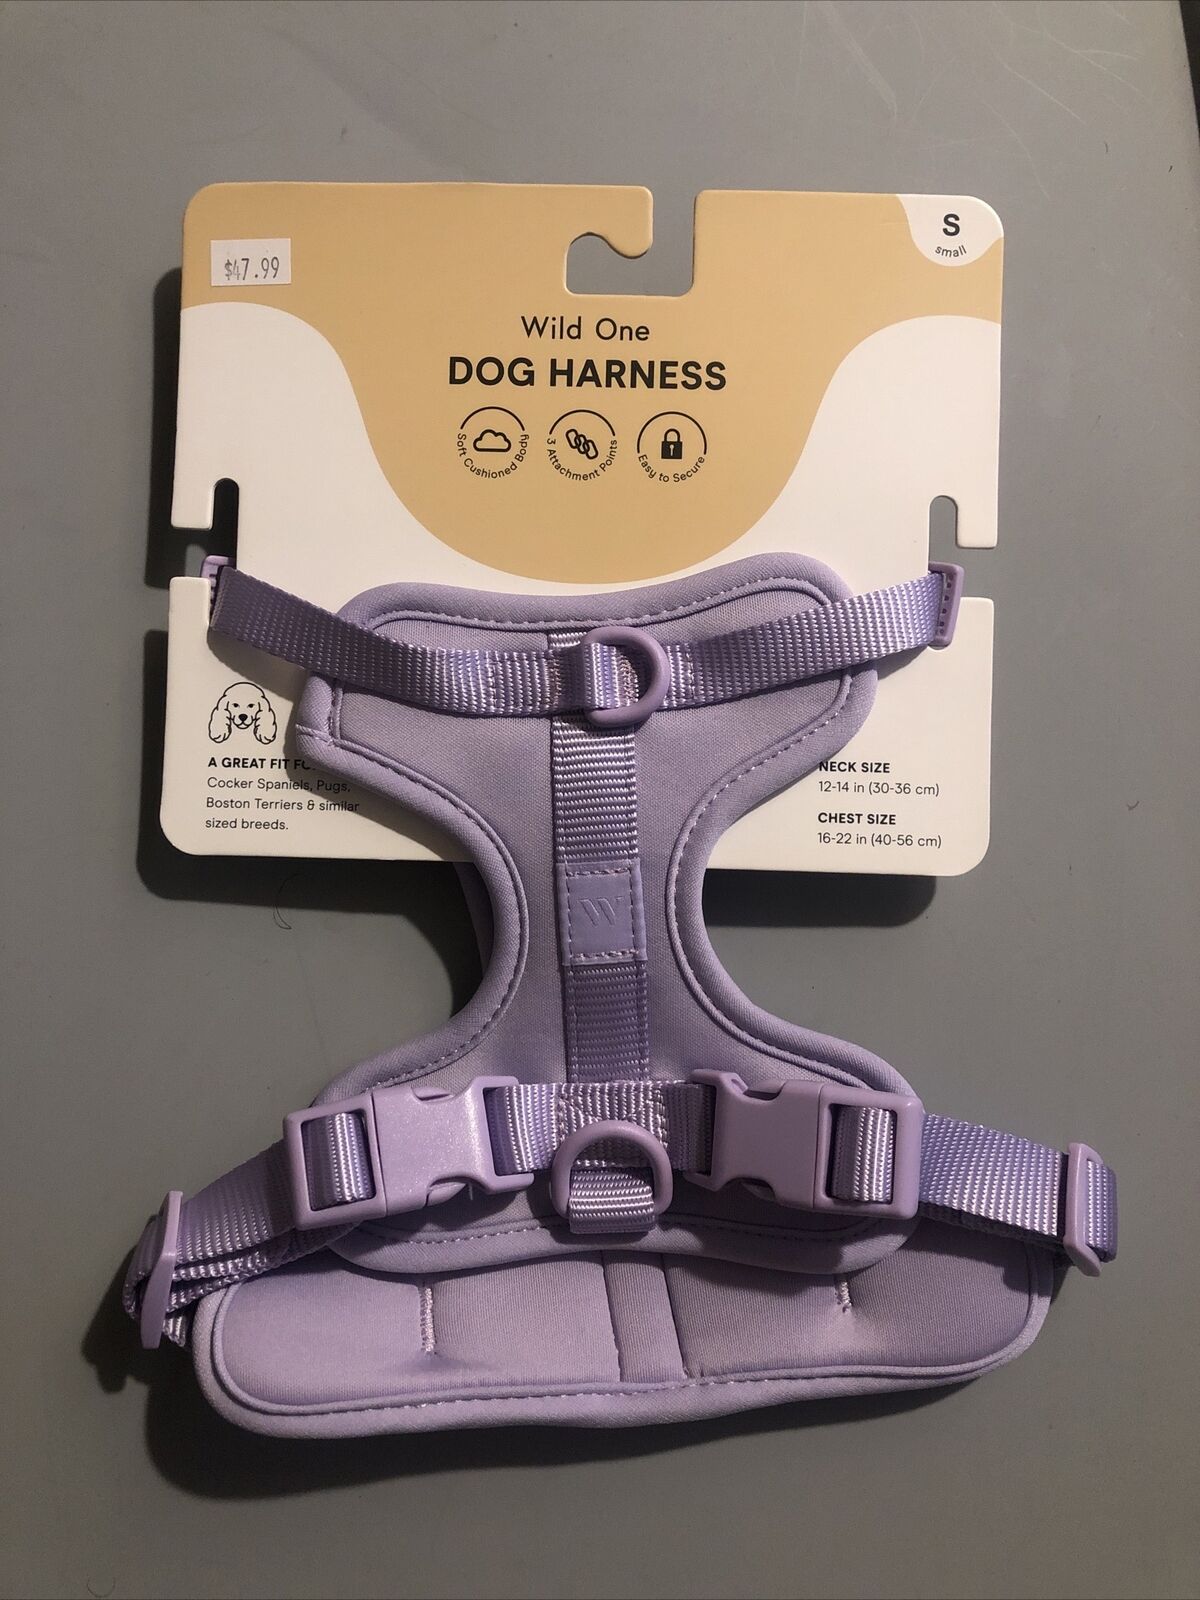 New Wild One Dog Harness Small dog Lilac Lavender Purple S